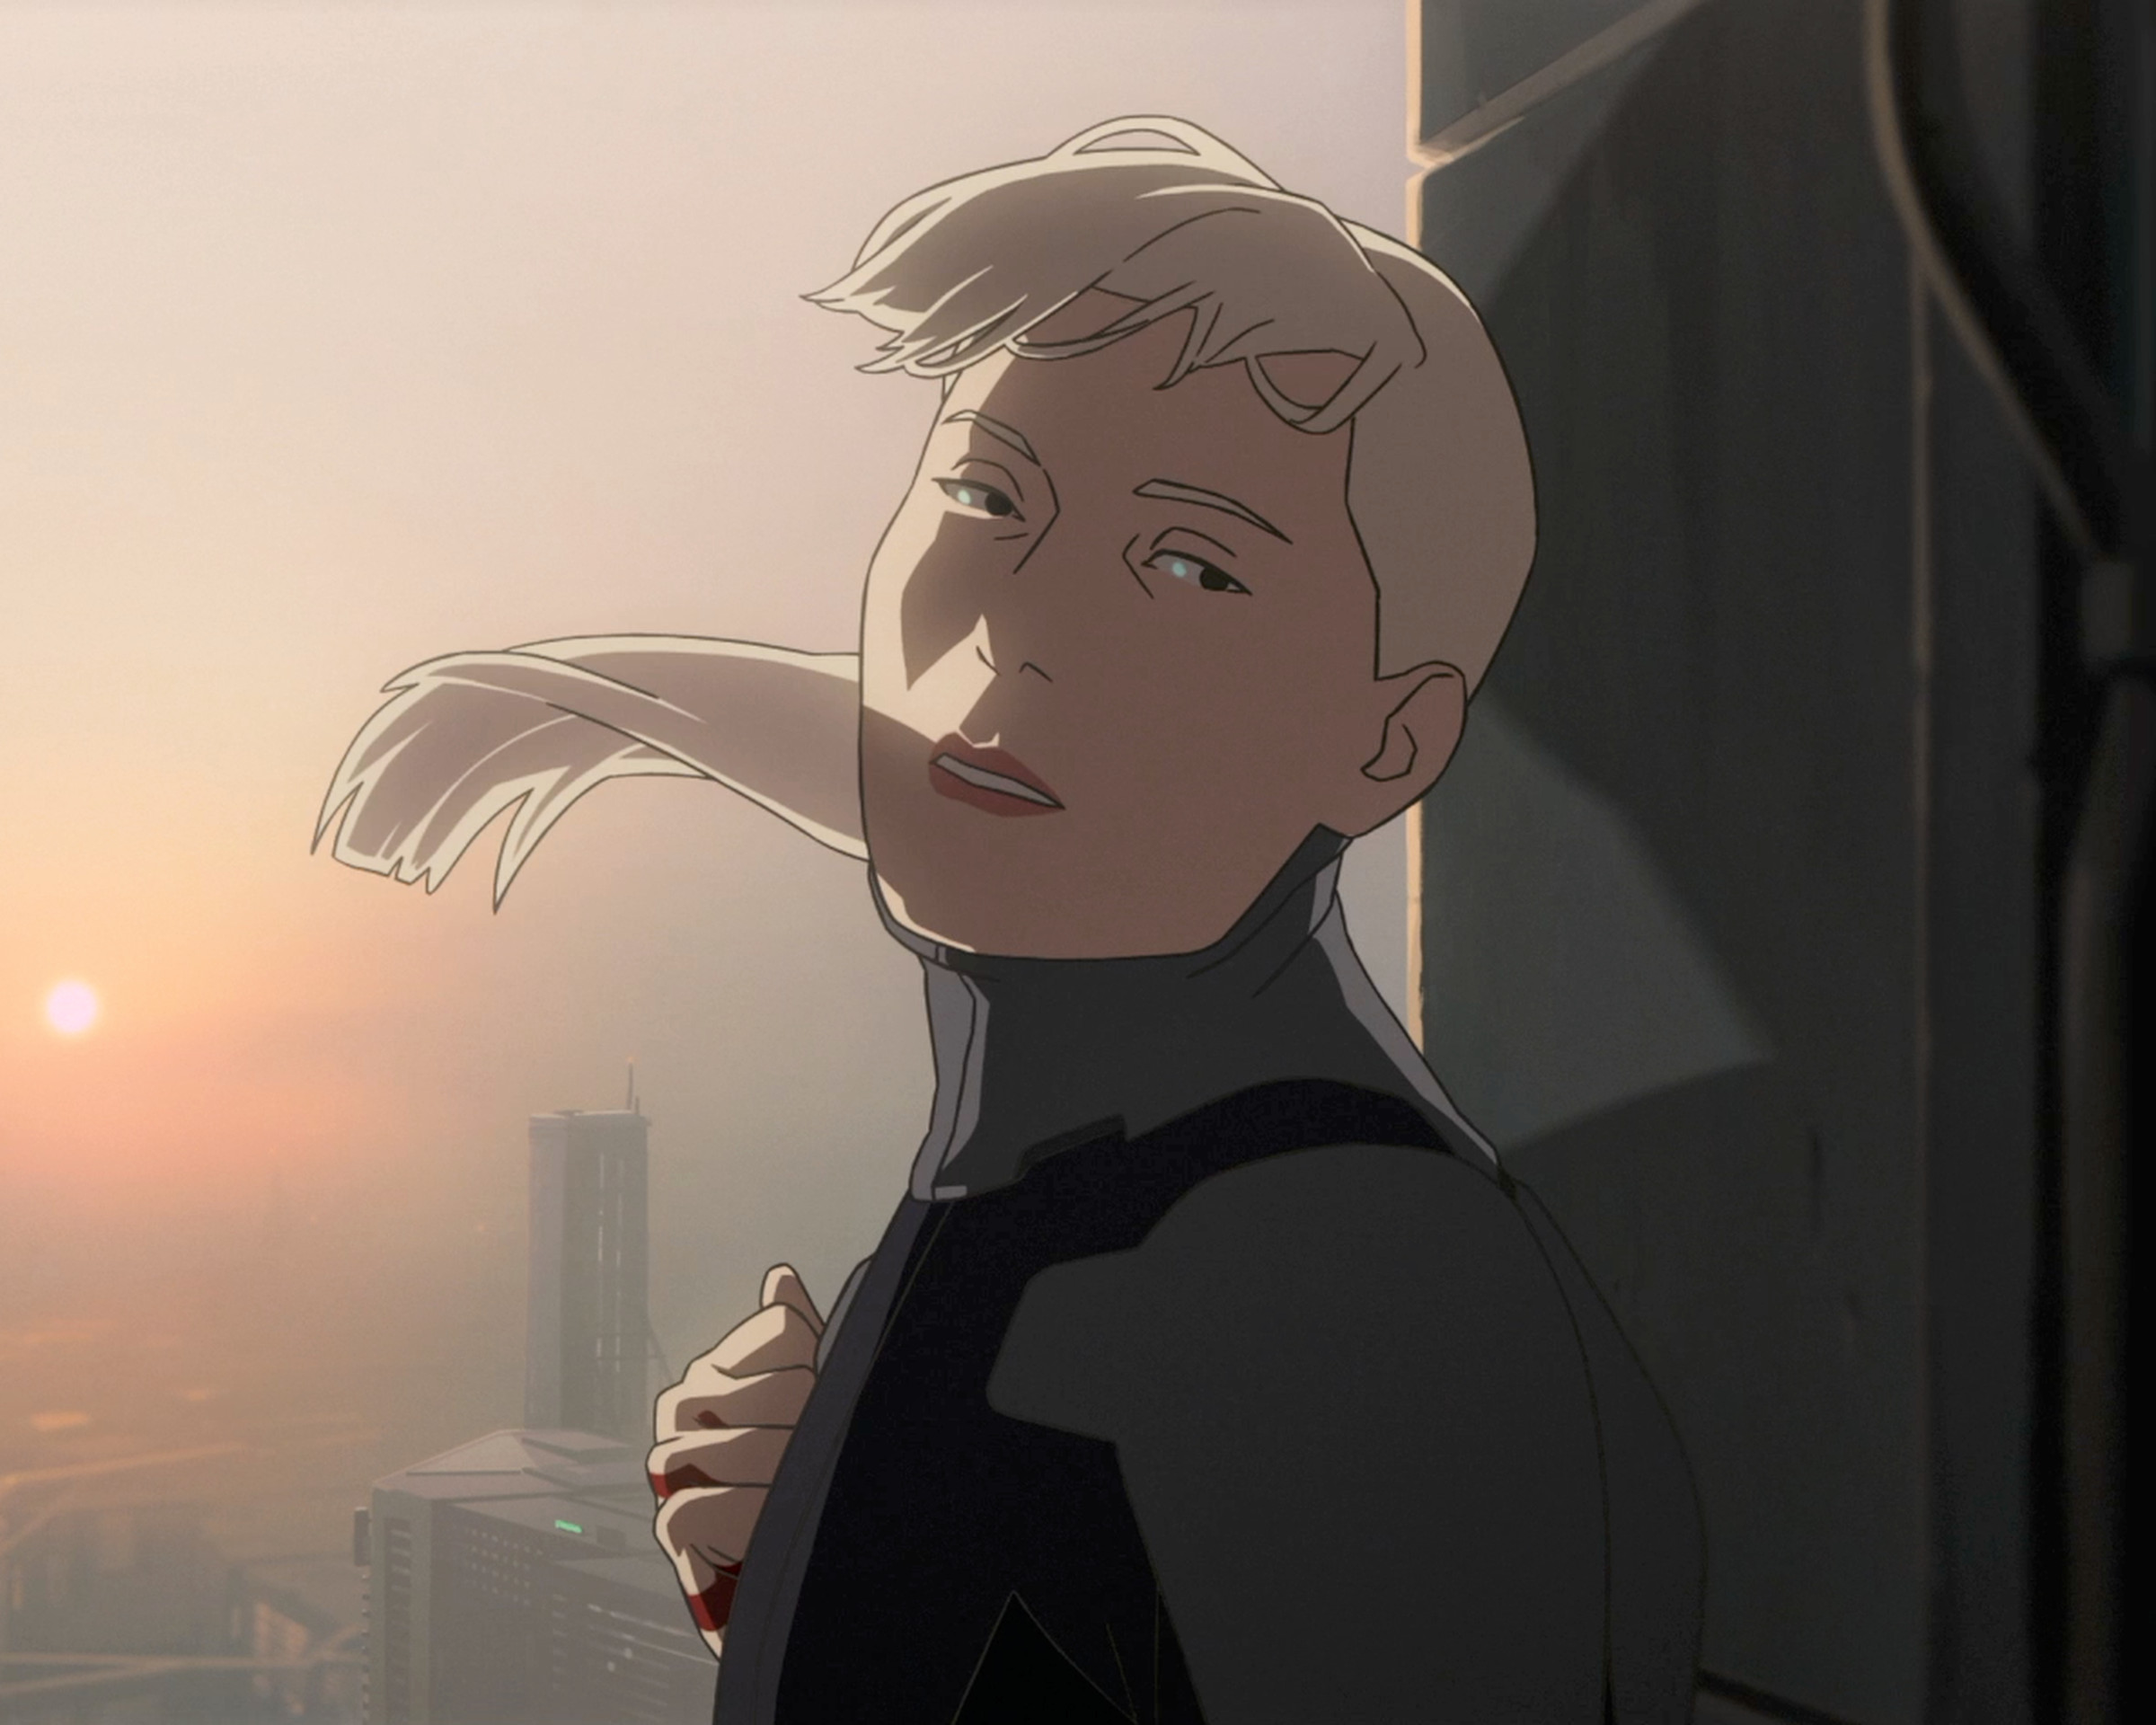 A still image from the animated film Mars Express.